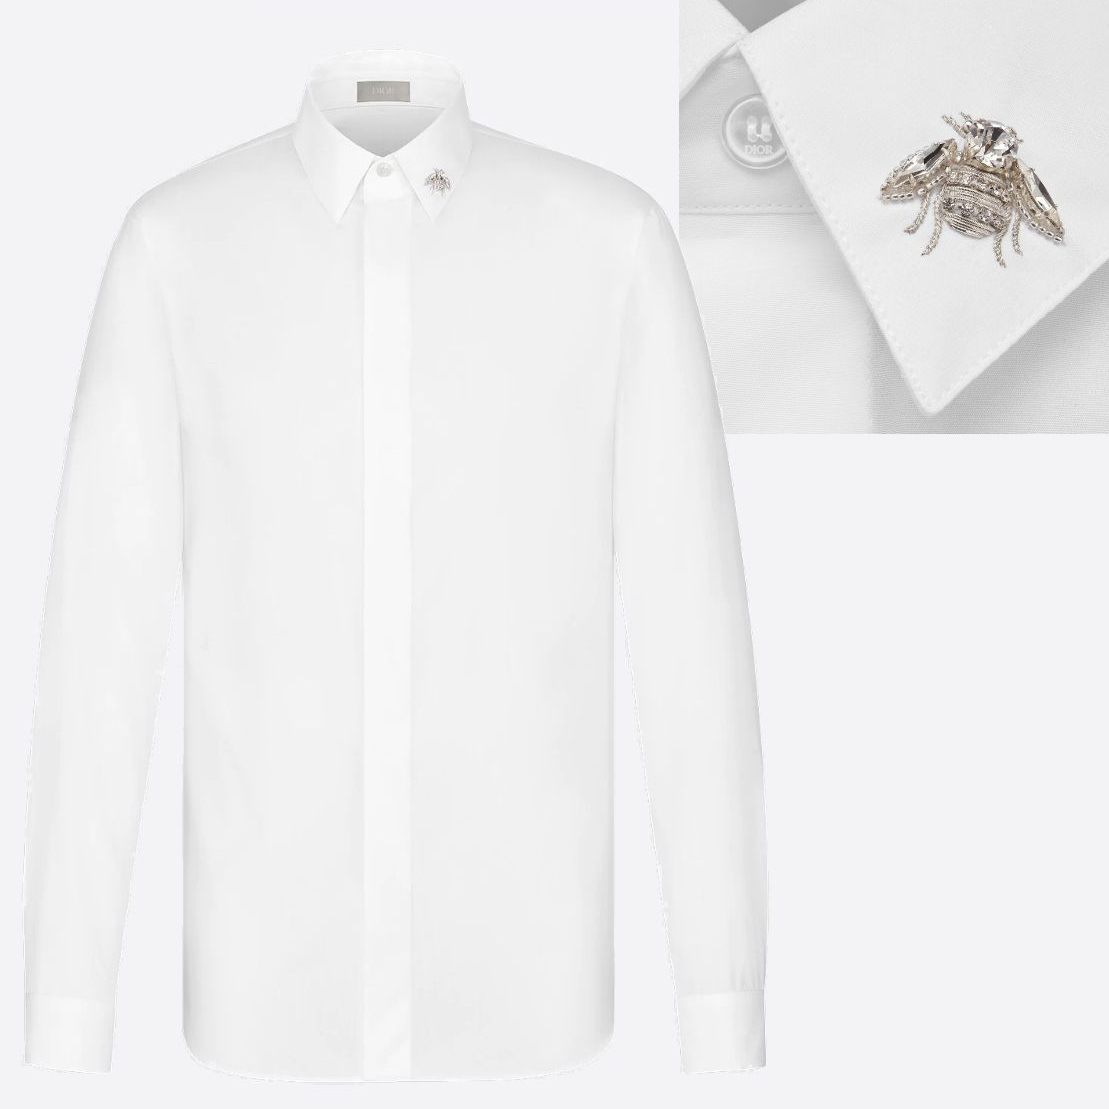 DIOR HOMME Shirt With Bee Jewel White Cotton Poplin (Ong 3D) (3).jpg